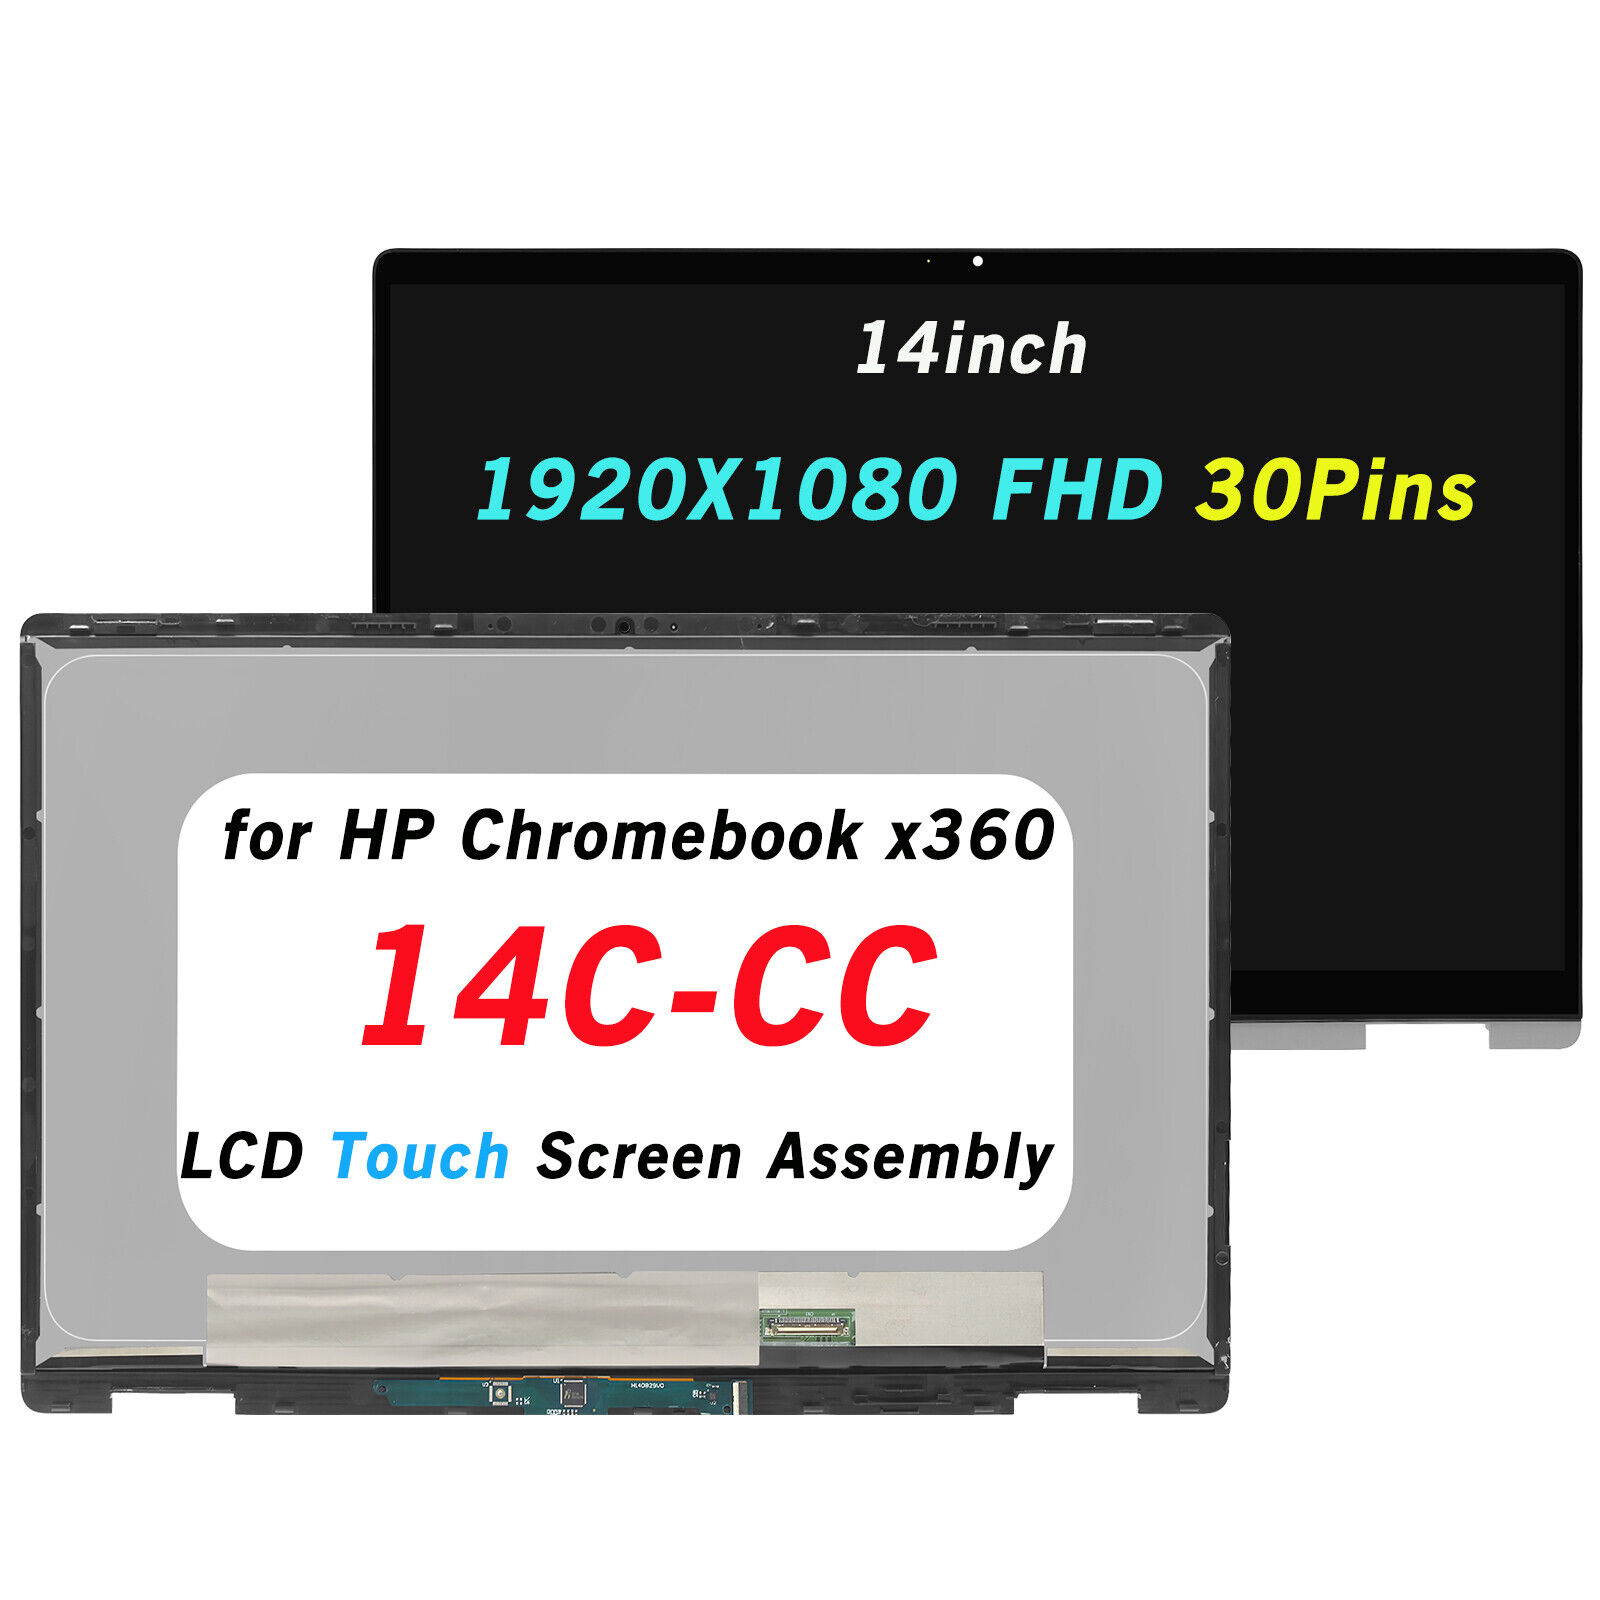 14in LCD FHD Touch Screen Assembly NV140FHM-N4T for HP Chromebook x360 14C-CC